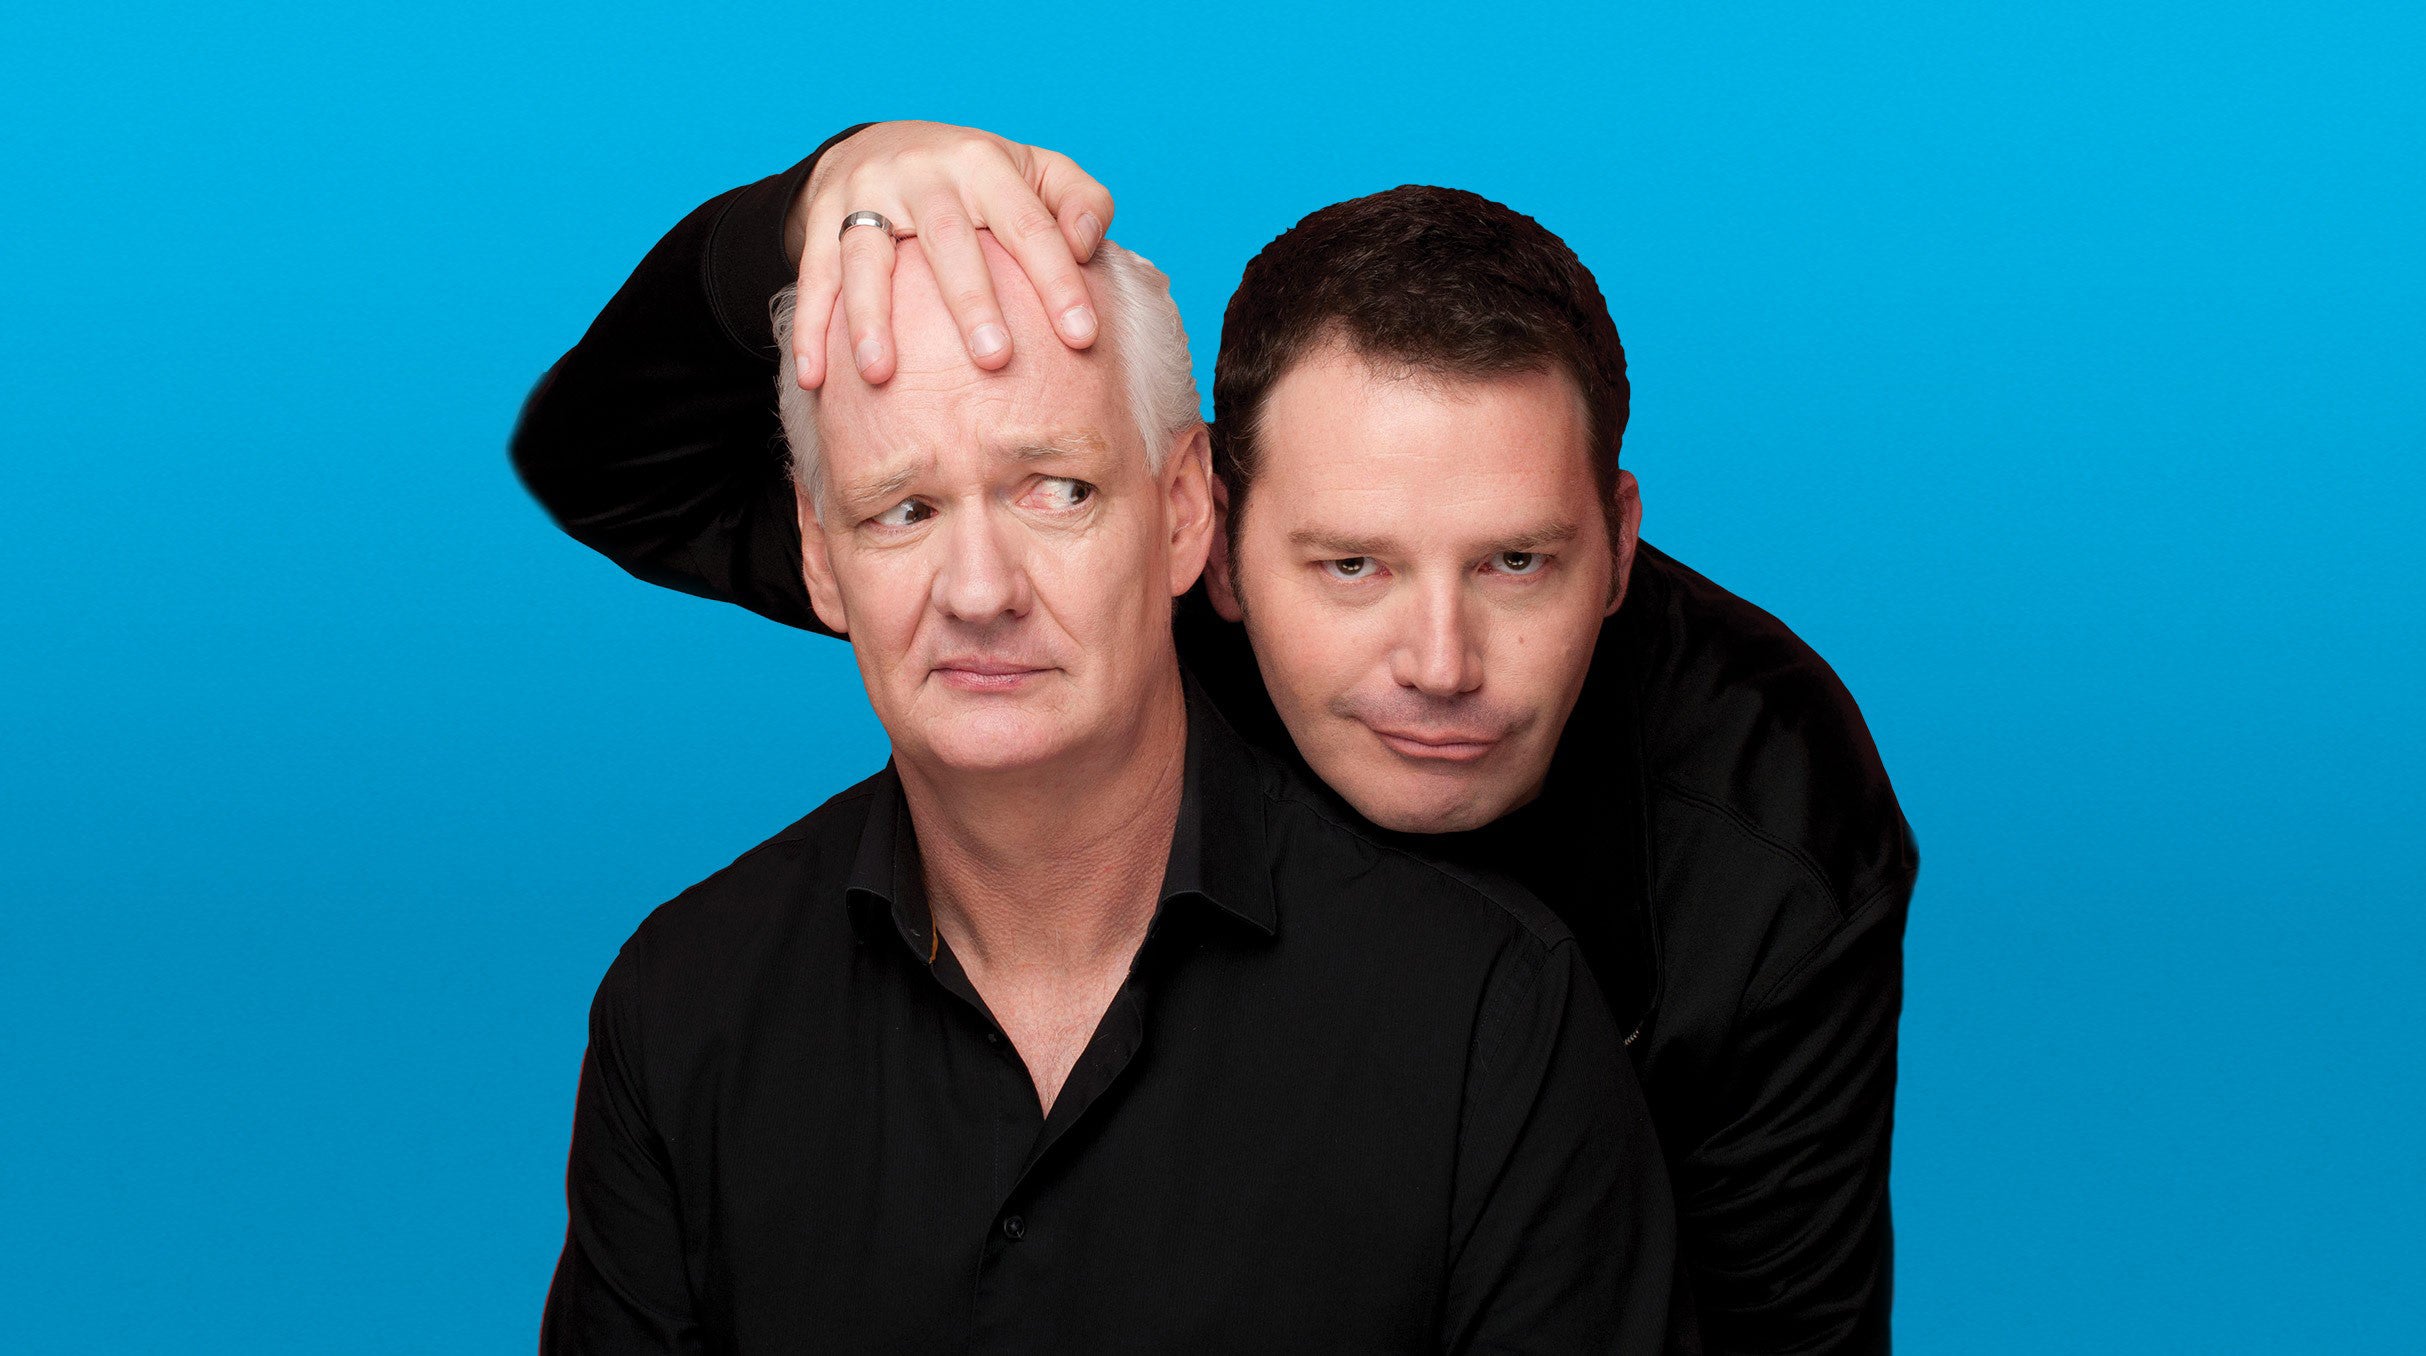 Colin Mochrie & Brad Sherwood: Asking for Trouble in Utica promo photo for Exclusive presale offer code